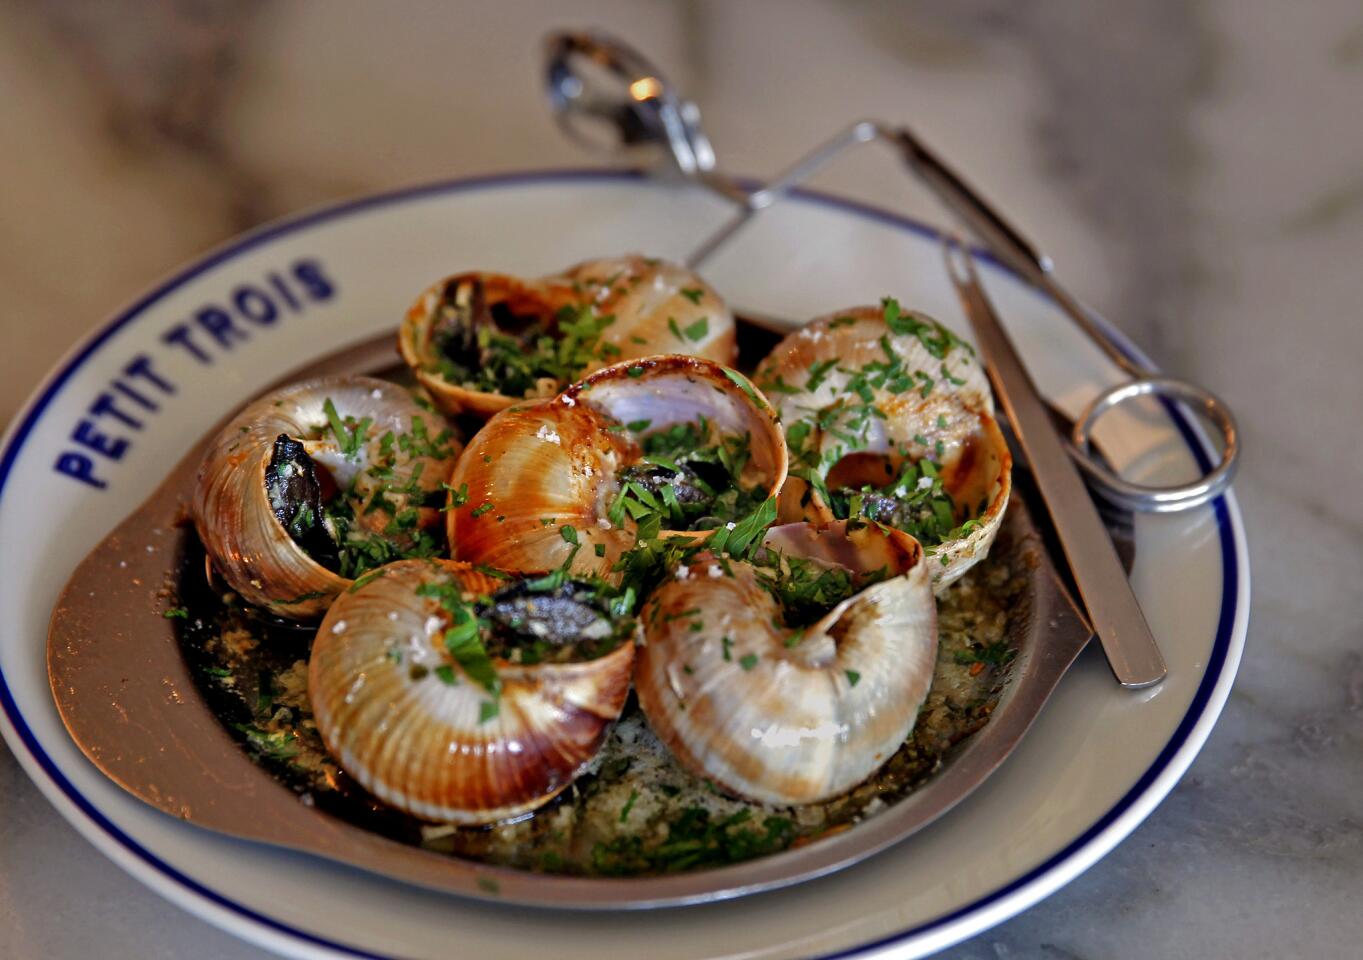 The escargot dish at Petit Trois is brimming with garlic, minced parsley and good melted butter.